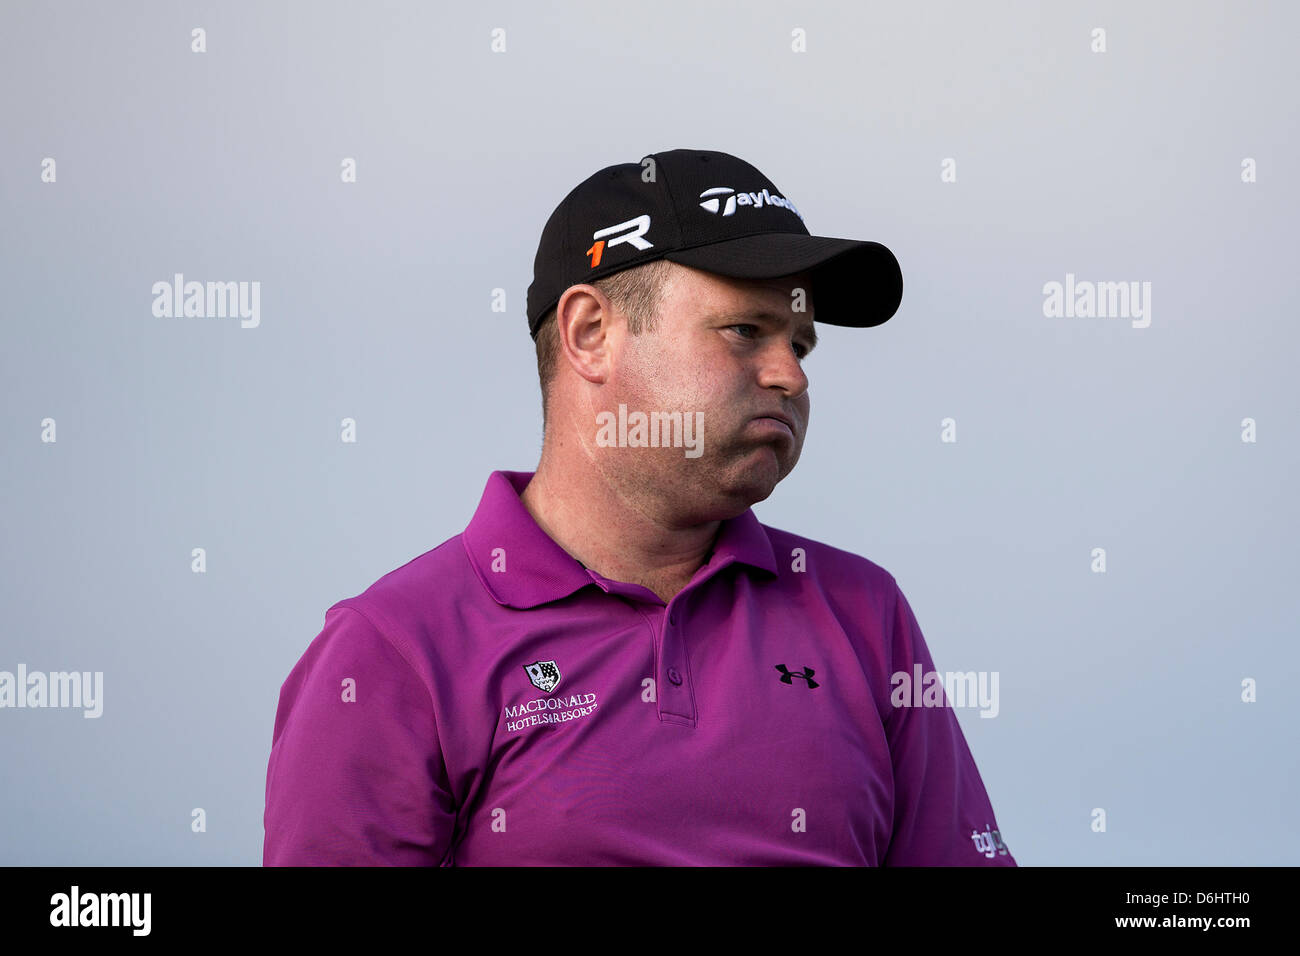 18.04.2013 Valencia, Spain. Alastair Forsyth reacts with frustration during round one of the Spanish Open from the El Saler Golf Course. Stock Photo